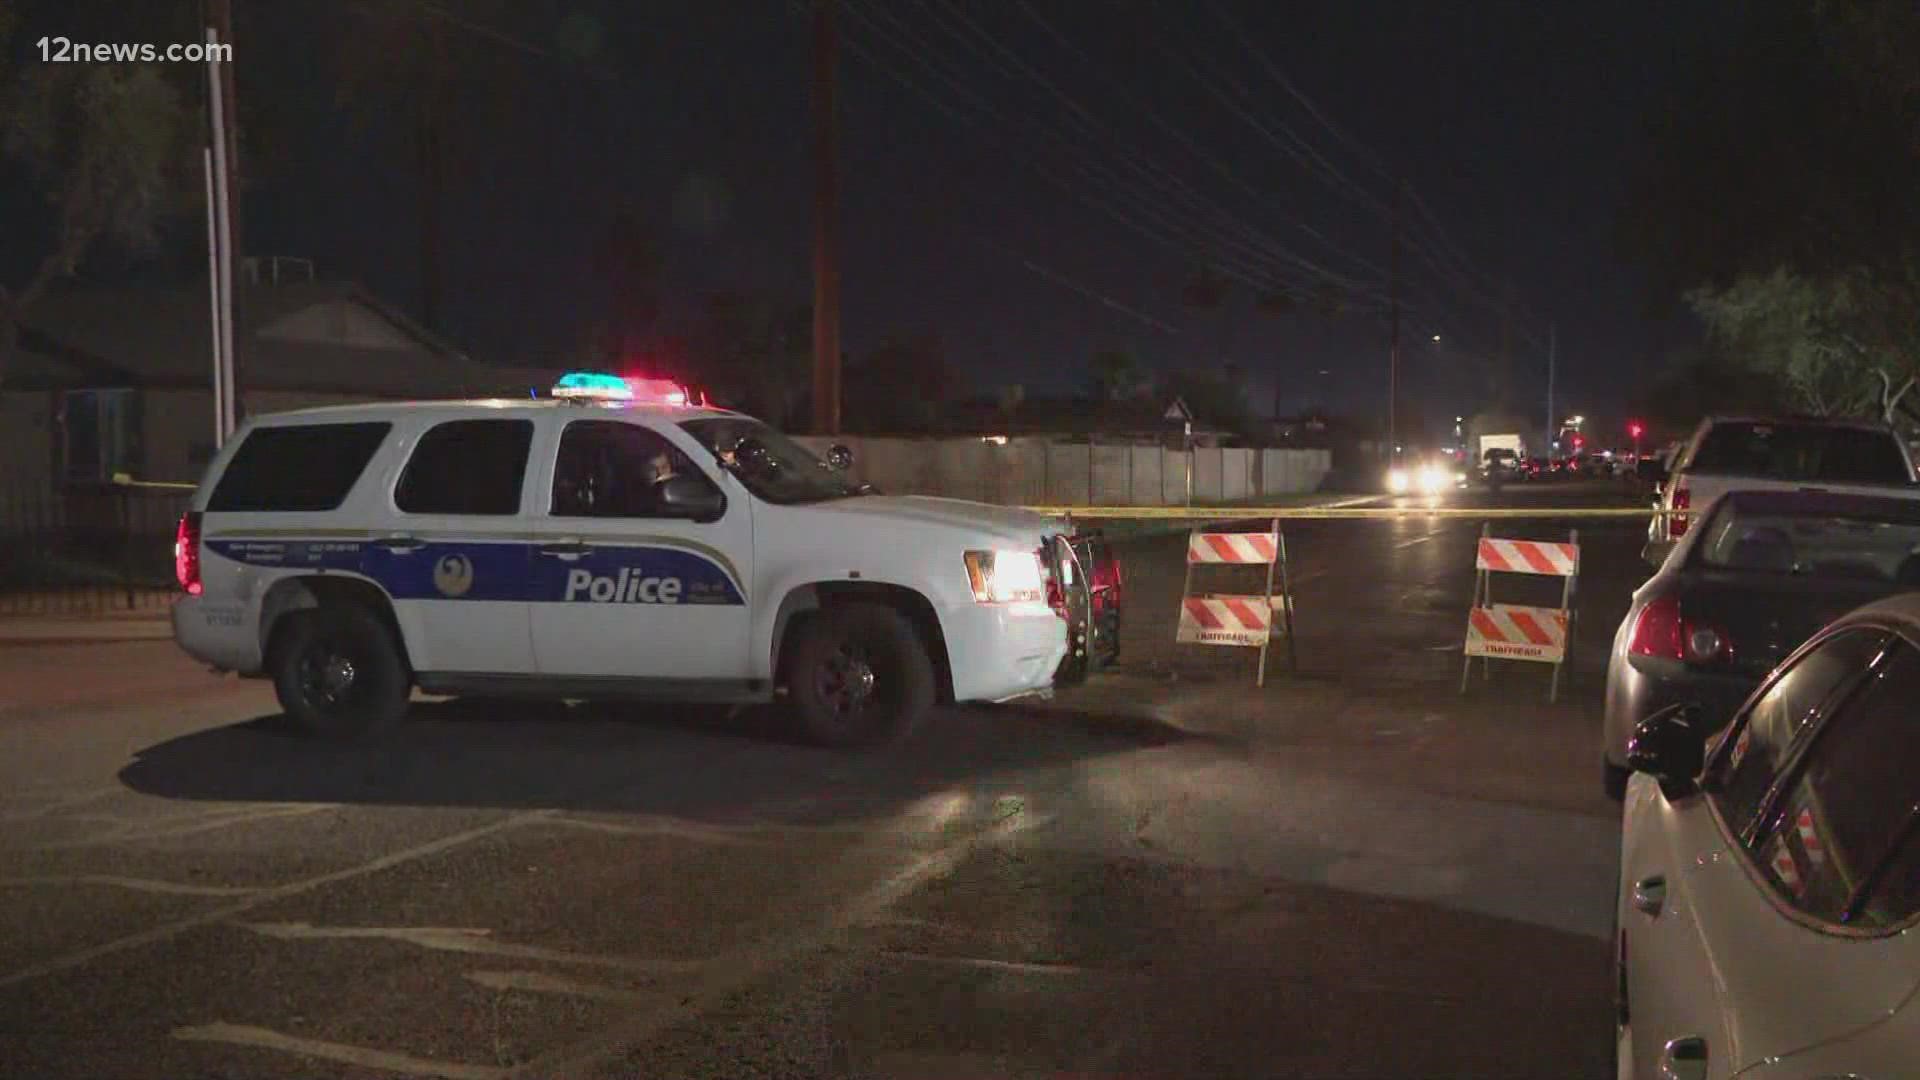 Police are investigating after a man was found dead inside a parked car in West Phoenix Wednesday night.